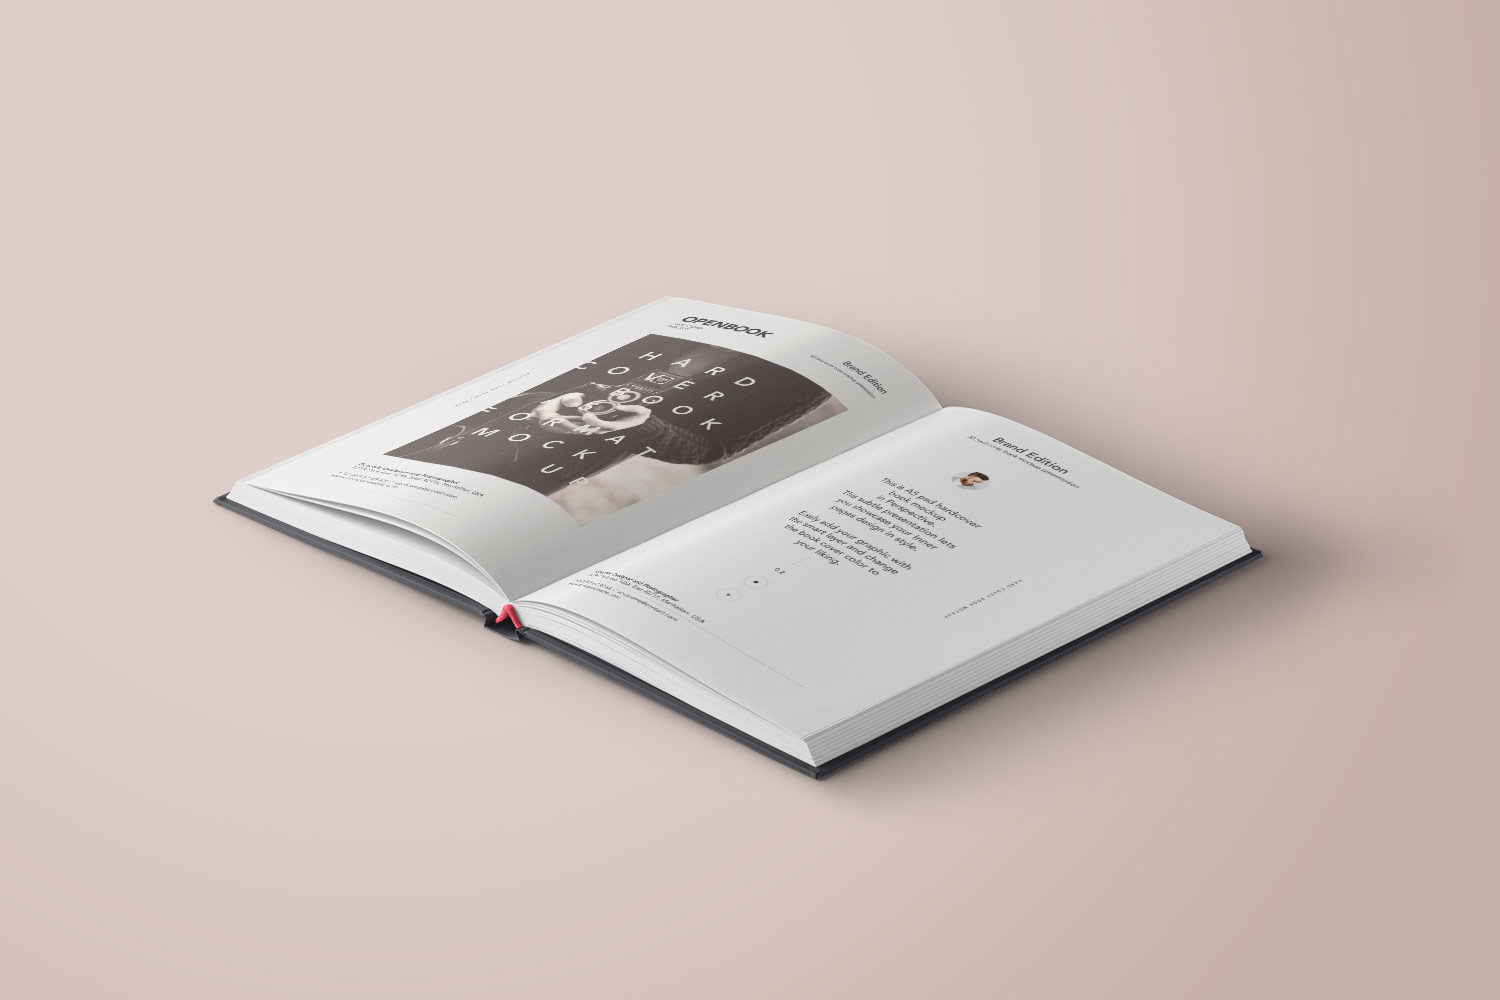 Download Open Hardcover Book - Free PSD Mockup | Free Mockup